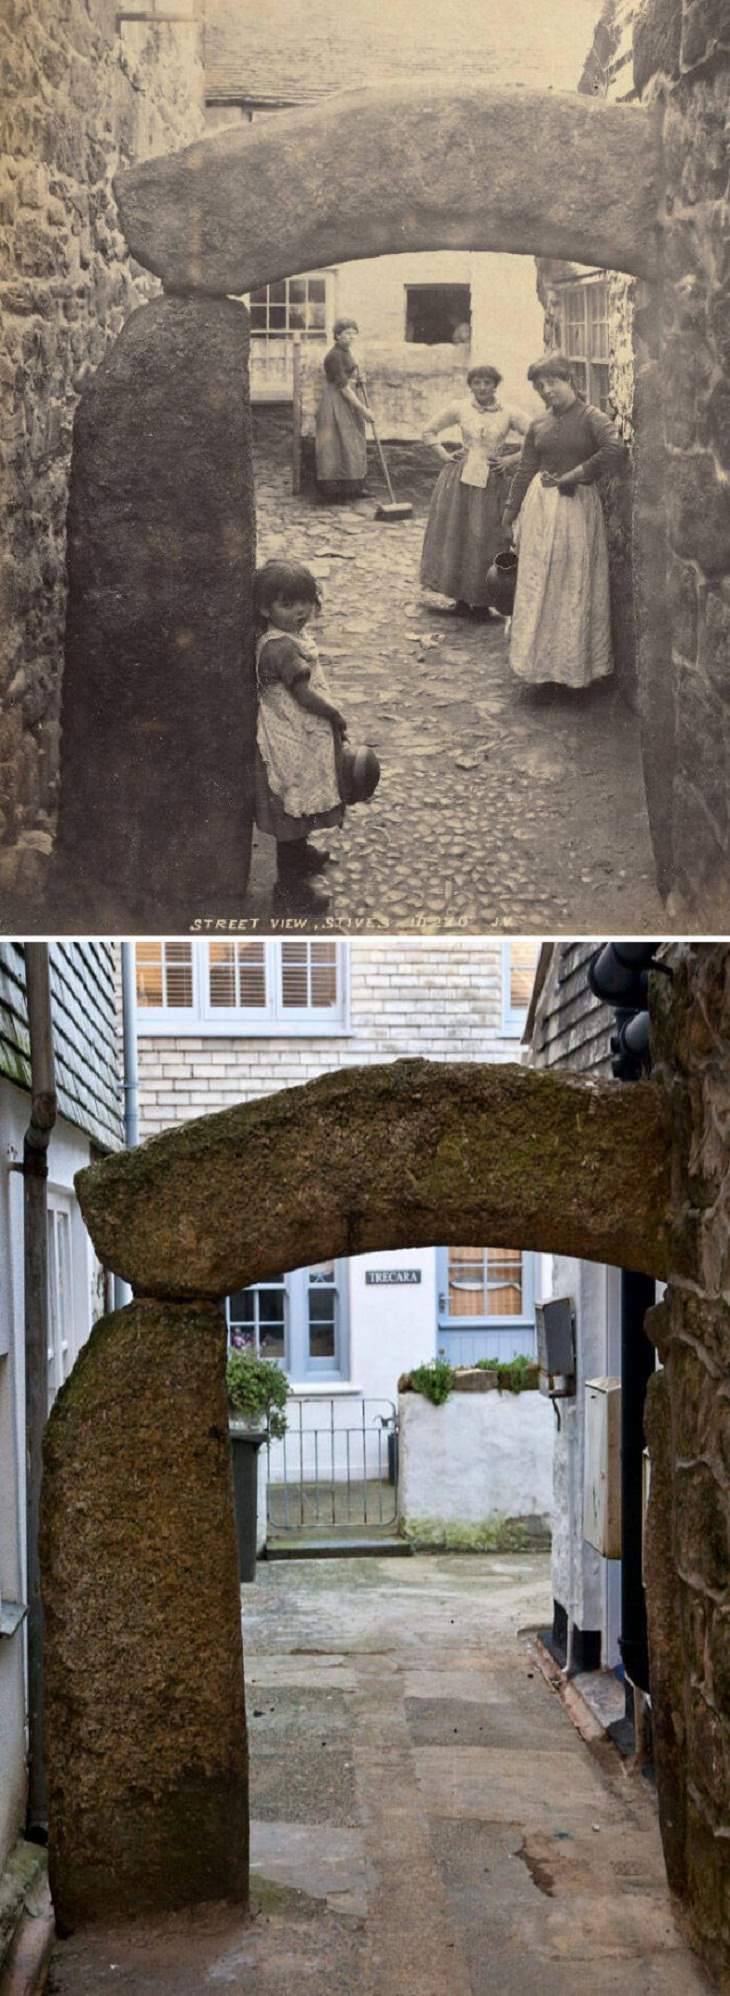 Hick's Court, St Ives, Inglaterra - 1888 y hoy